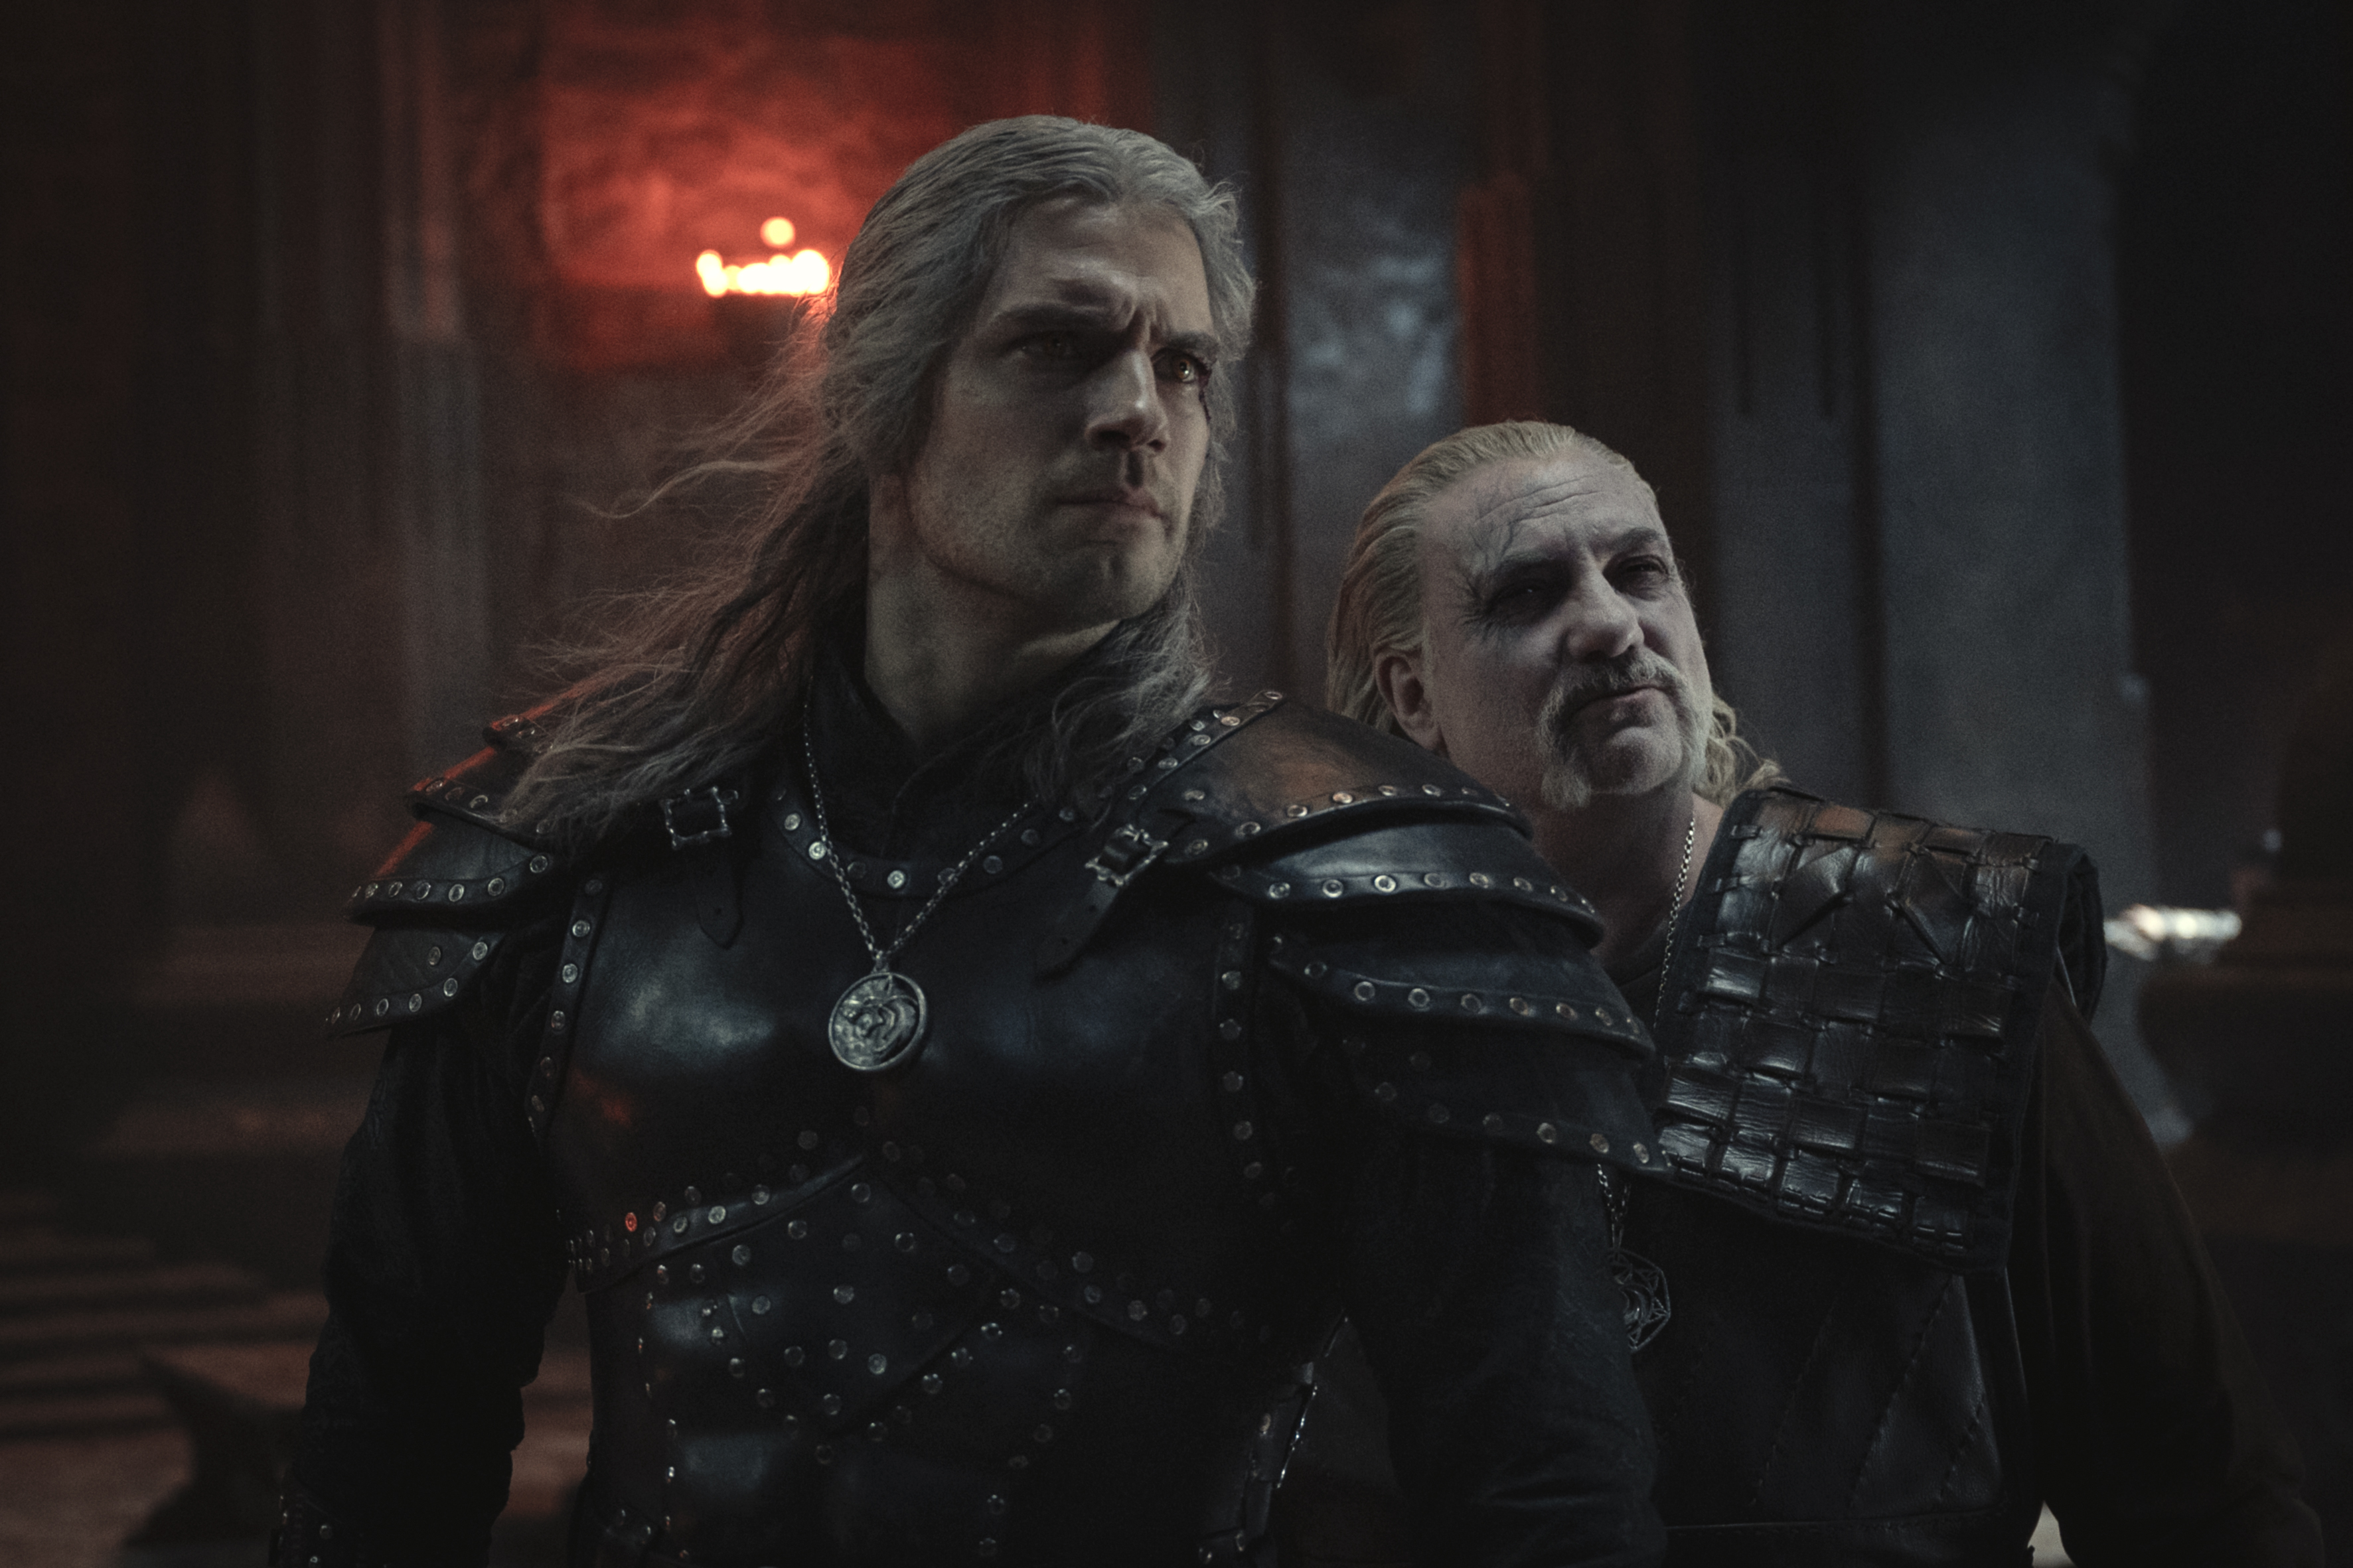 The Witcher season 3: Release date predictions & everything we know so far